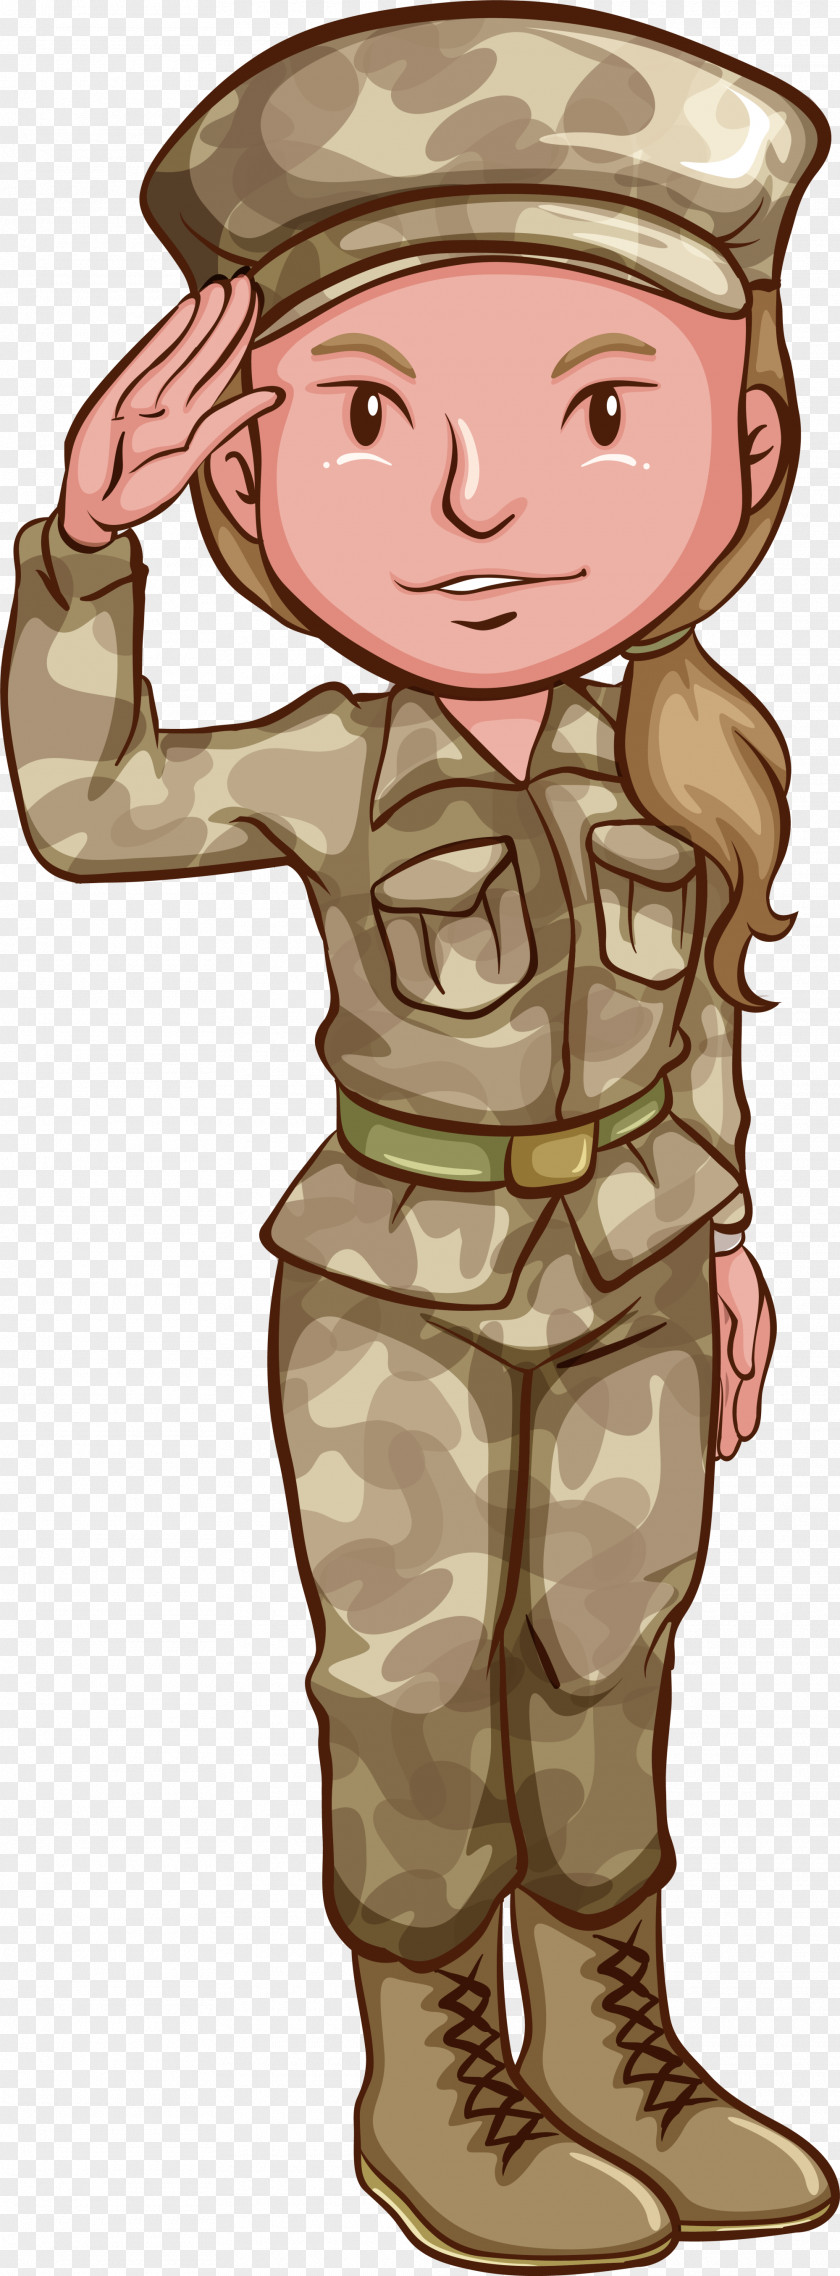 Army Green Cartoon Female Soldier Military Royalty-free Clip Art PNG